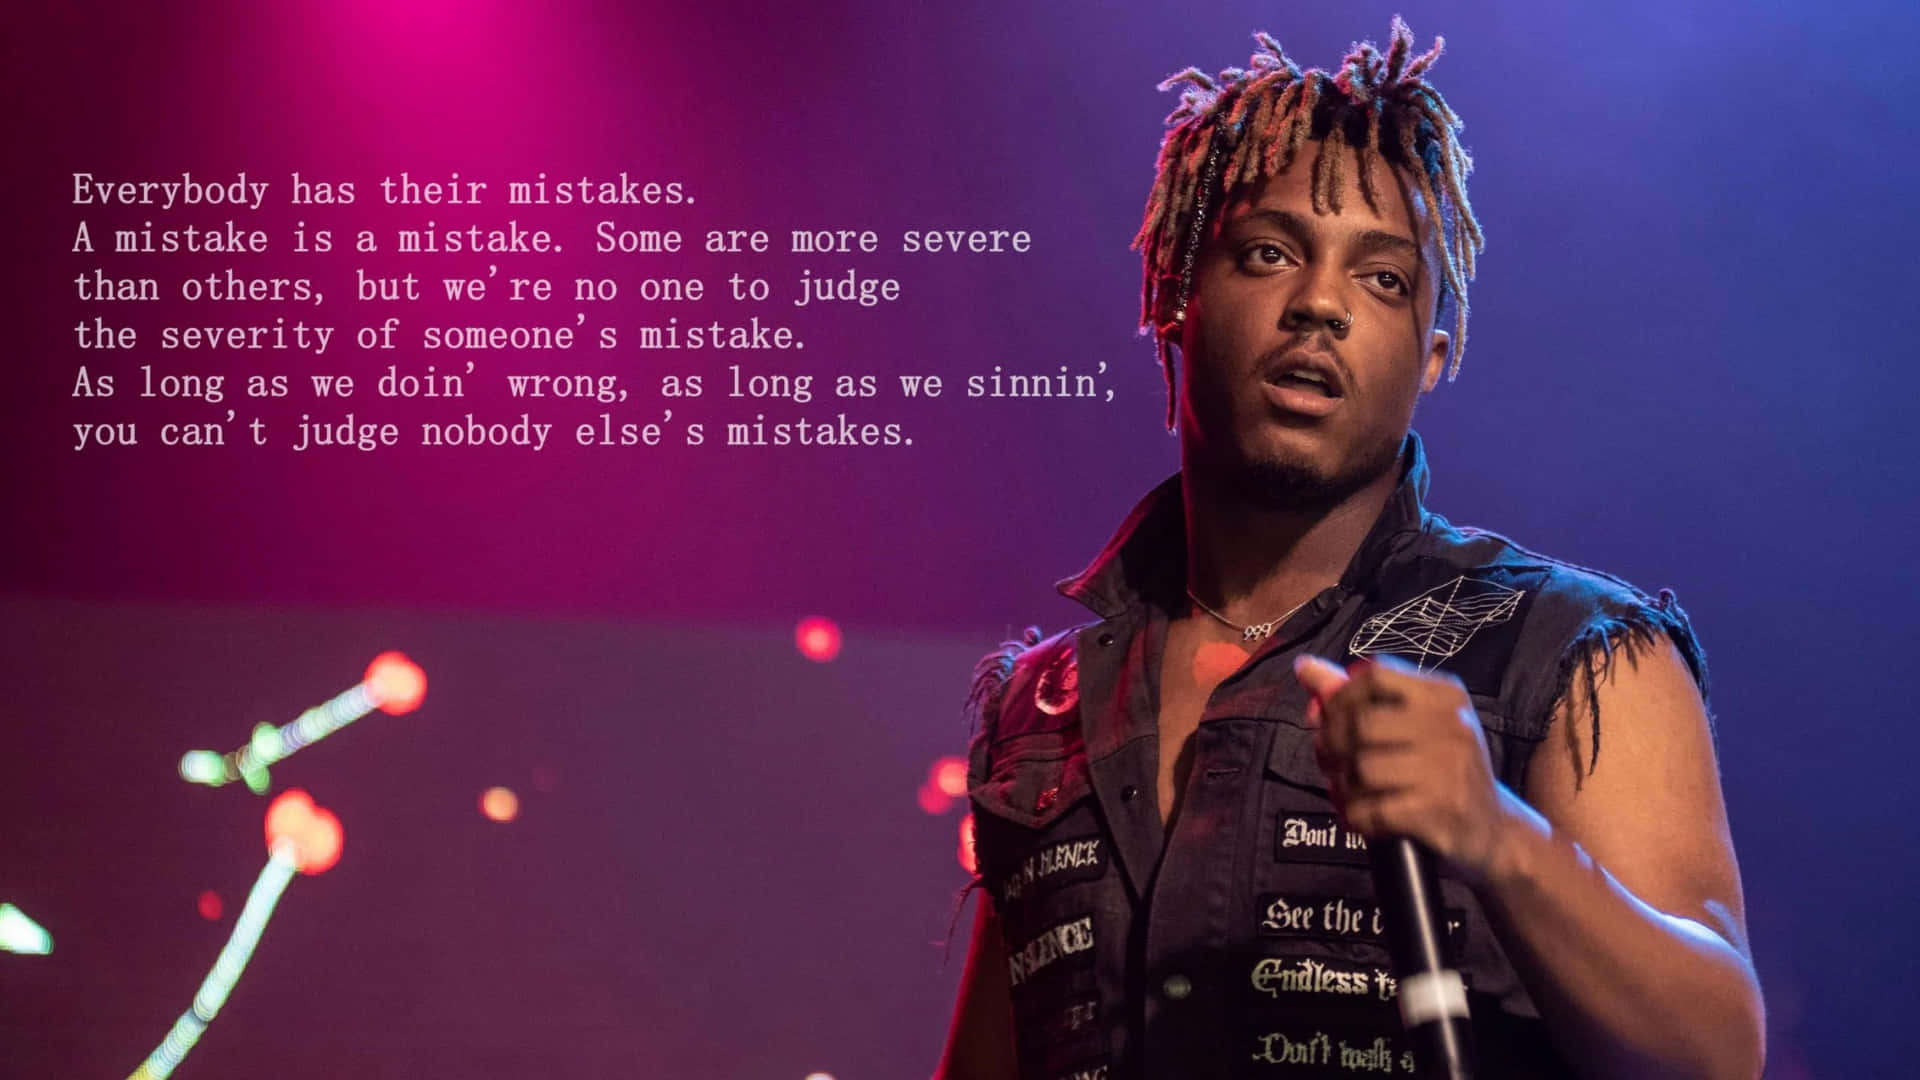 Inspirational Juice WRLD Quote on Visual Background Wallpaper